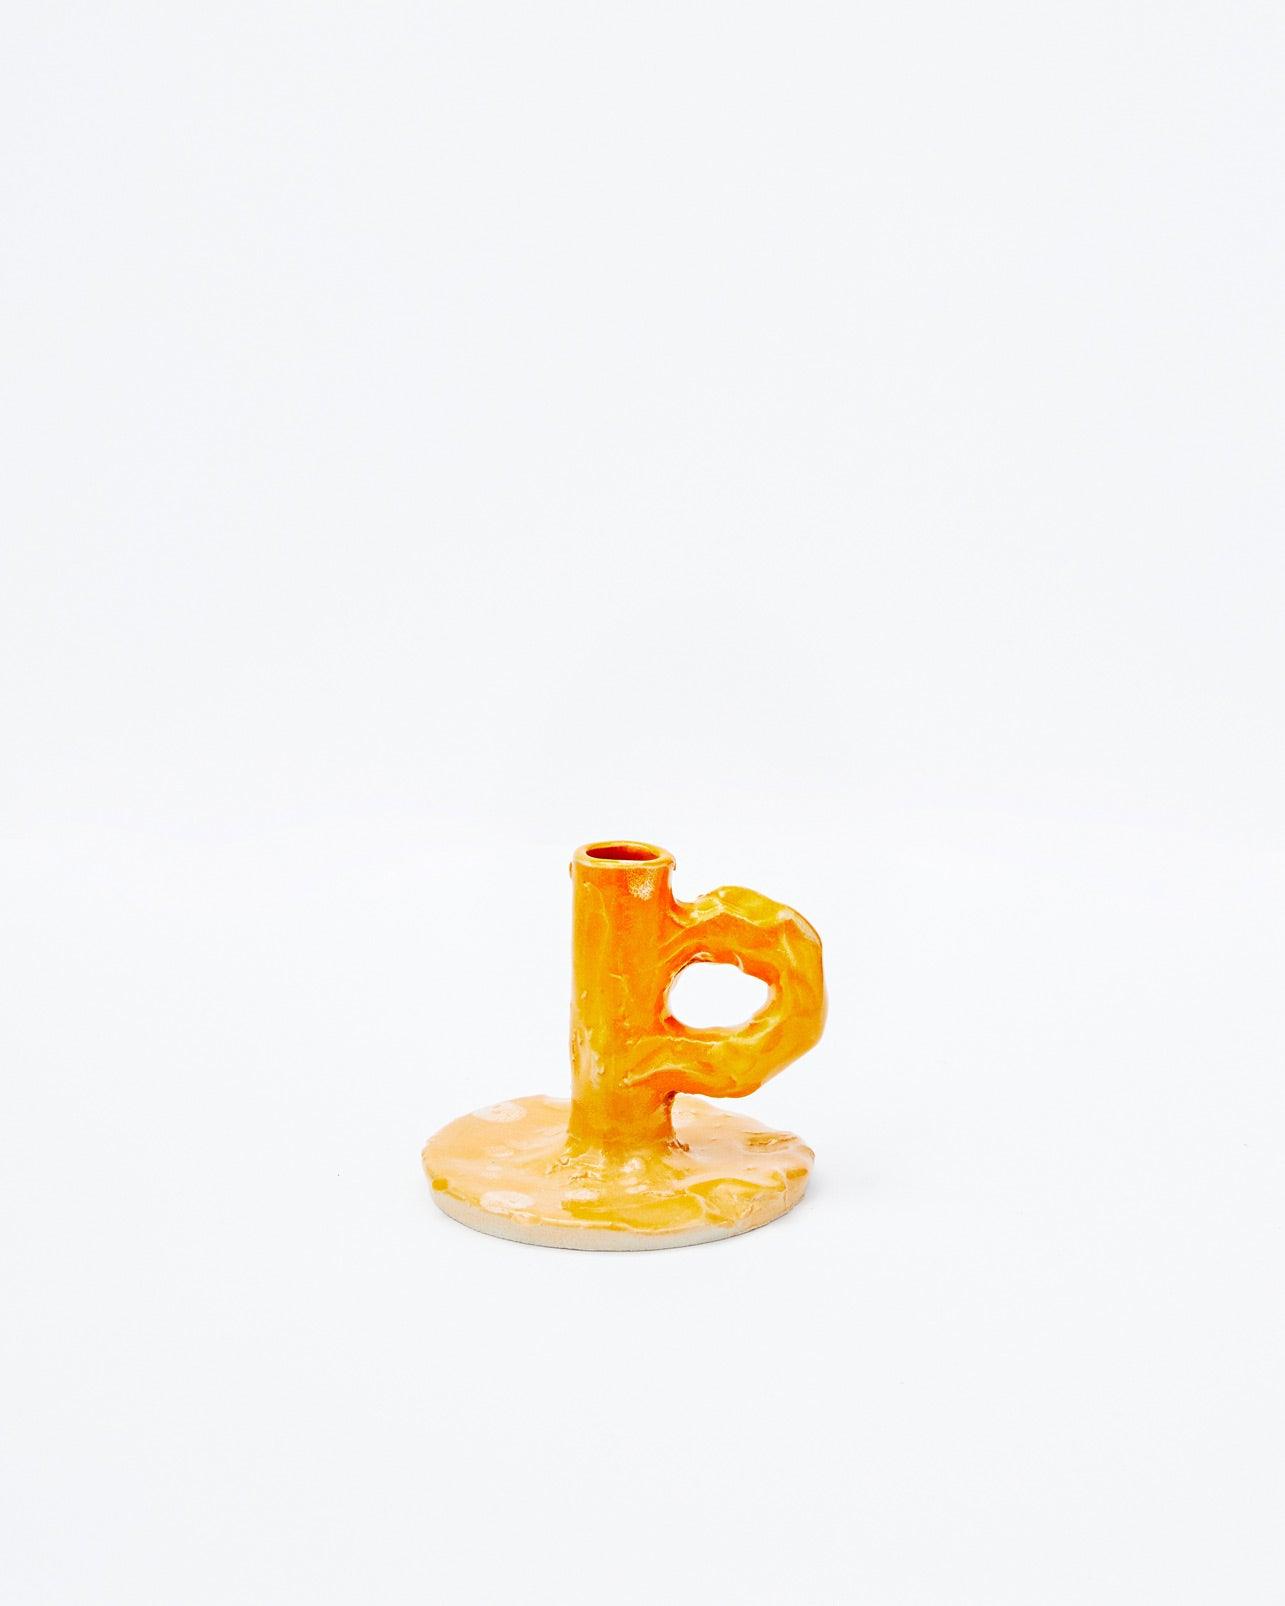 Handmade orange candlestick with handle with front view on a white background